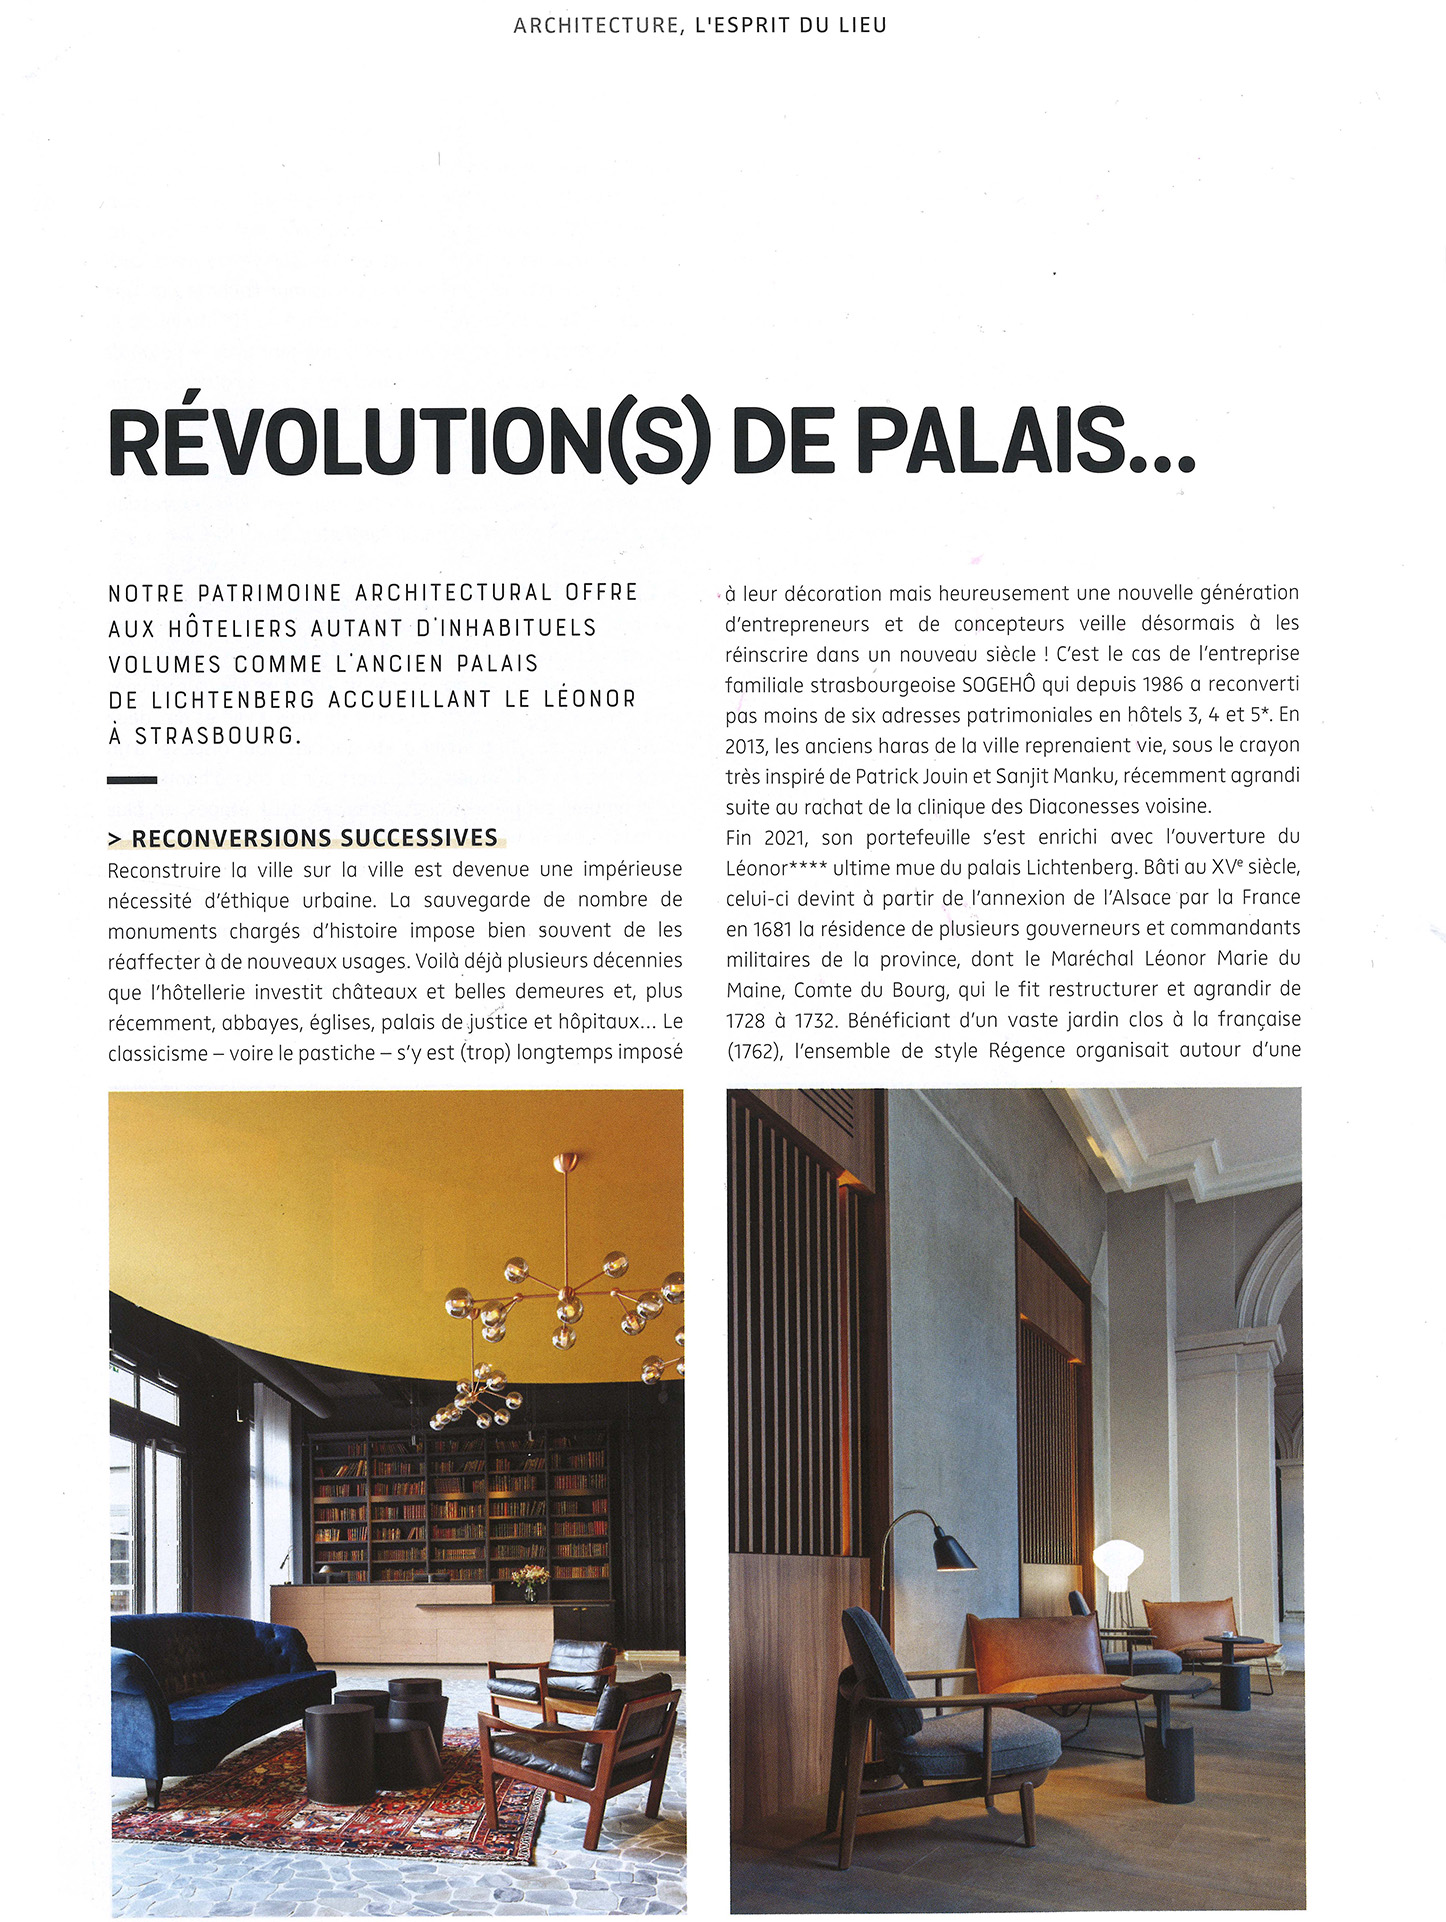 NDA Magazine article on the rehabilitation of a courthouse in Strasbourg into a luxury hotel by the studio jean-philippe nuel